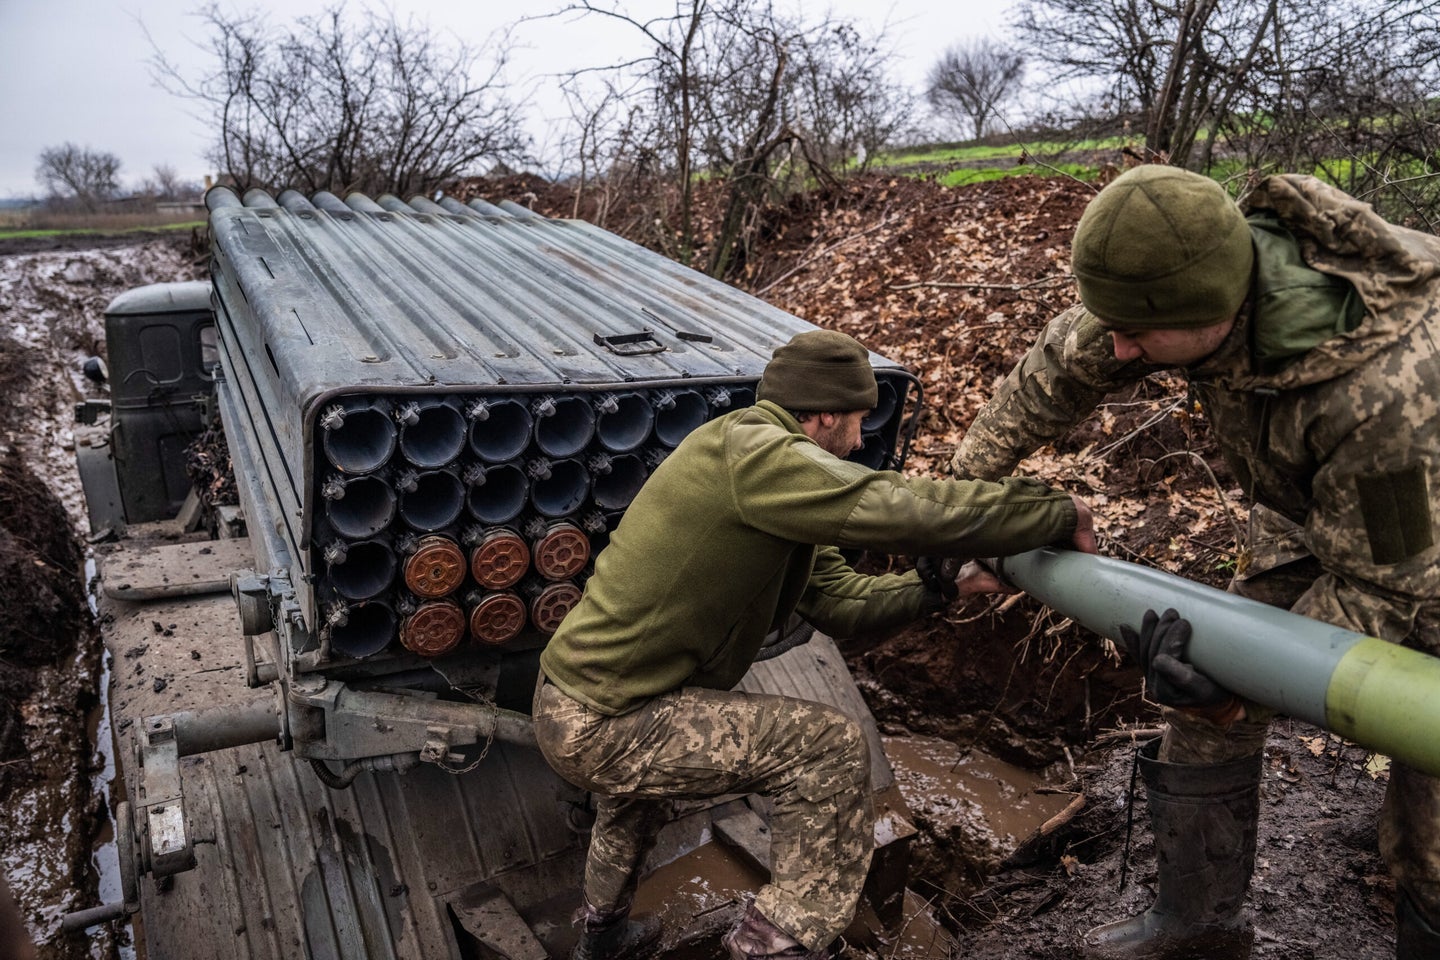 DONETSK OBLAST, UKRAINE - 2022/11/20: Soldiers from the 10th Mountain Assault Brigade of Ukraine unload munitions from a BM-21 Grad multiple rocket launcher near the frontlines in Donbas, Ukraine. (Photo by Laurel Chor/SOPA Images/LightRocket via Getty Images)